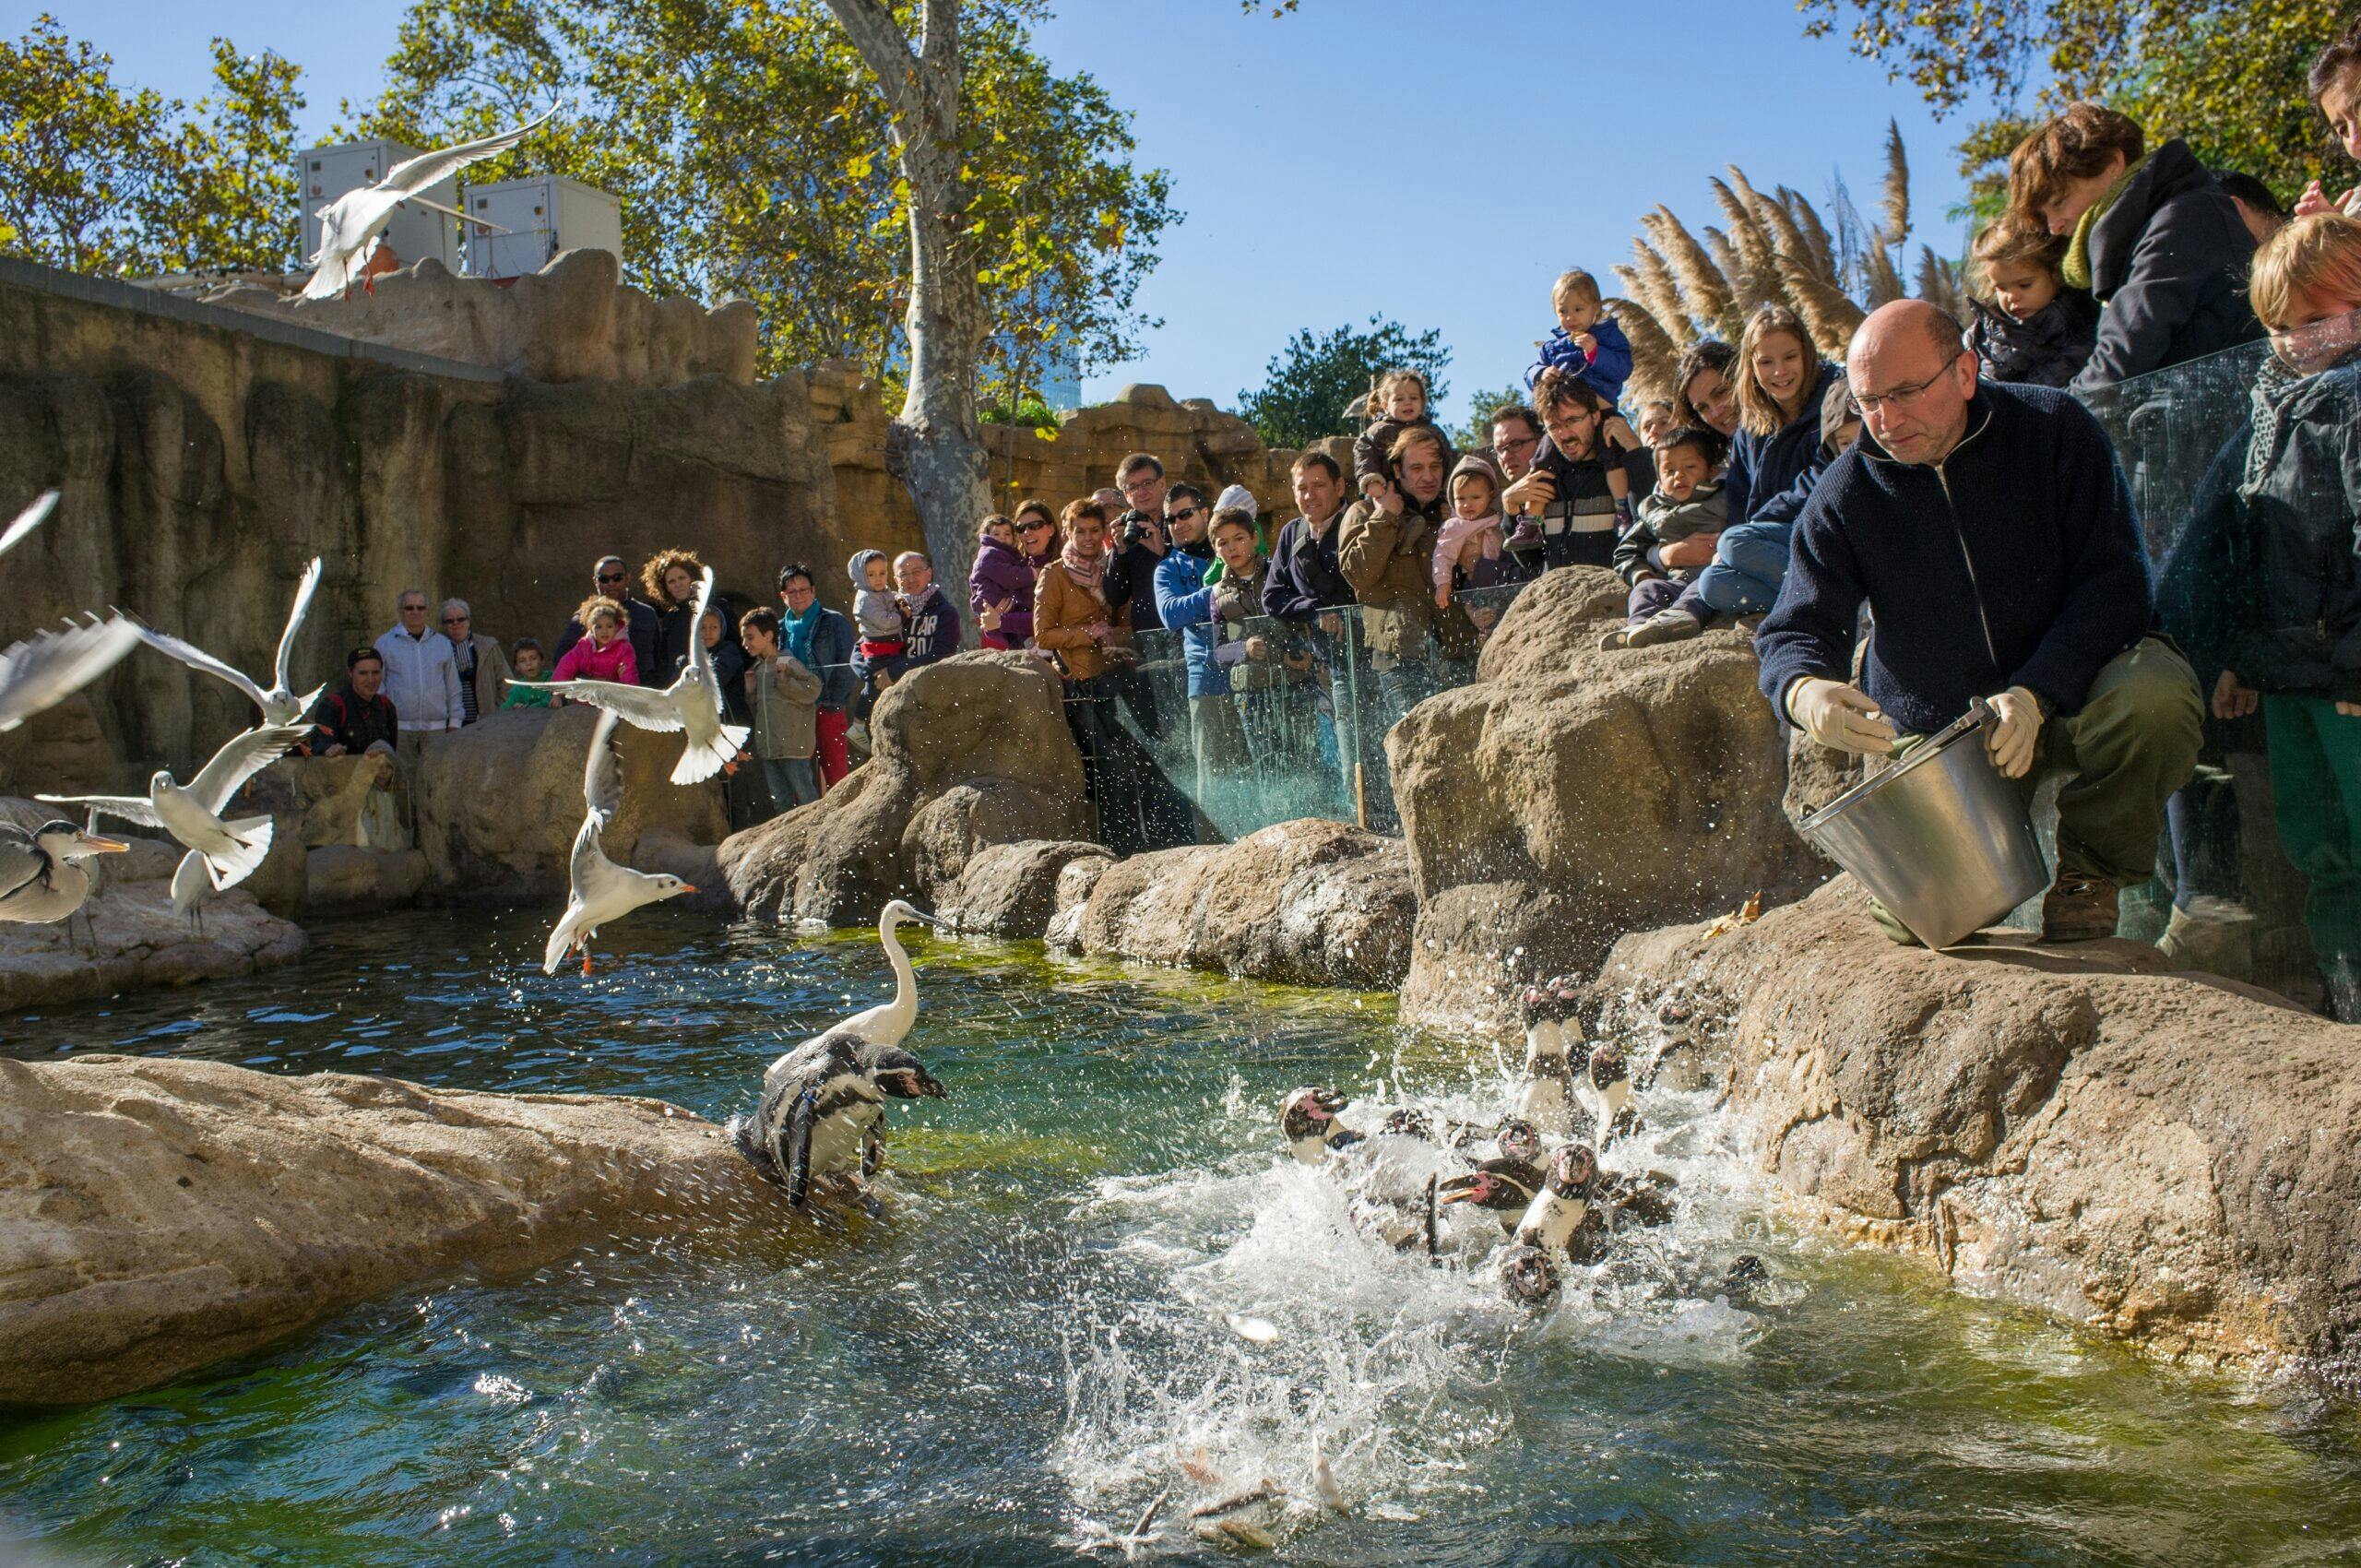 A photo of a zoo keeper feeding penguins at the zoo with a large crowd watching on.